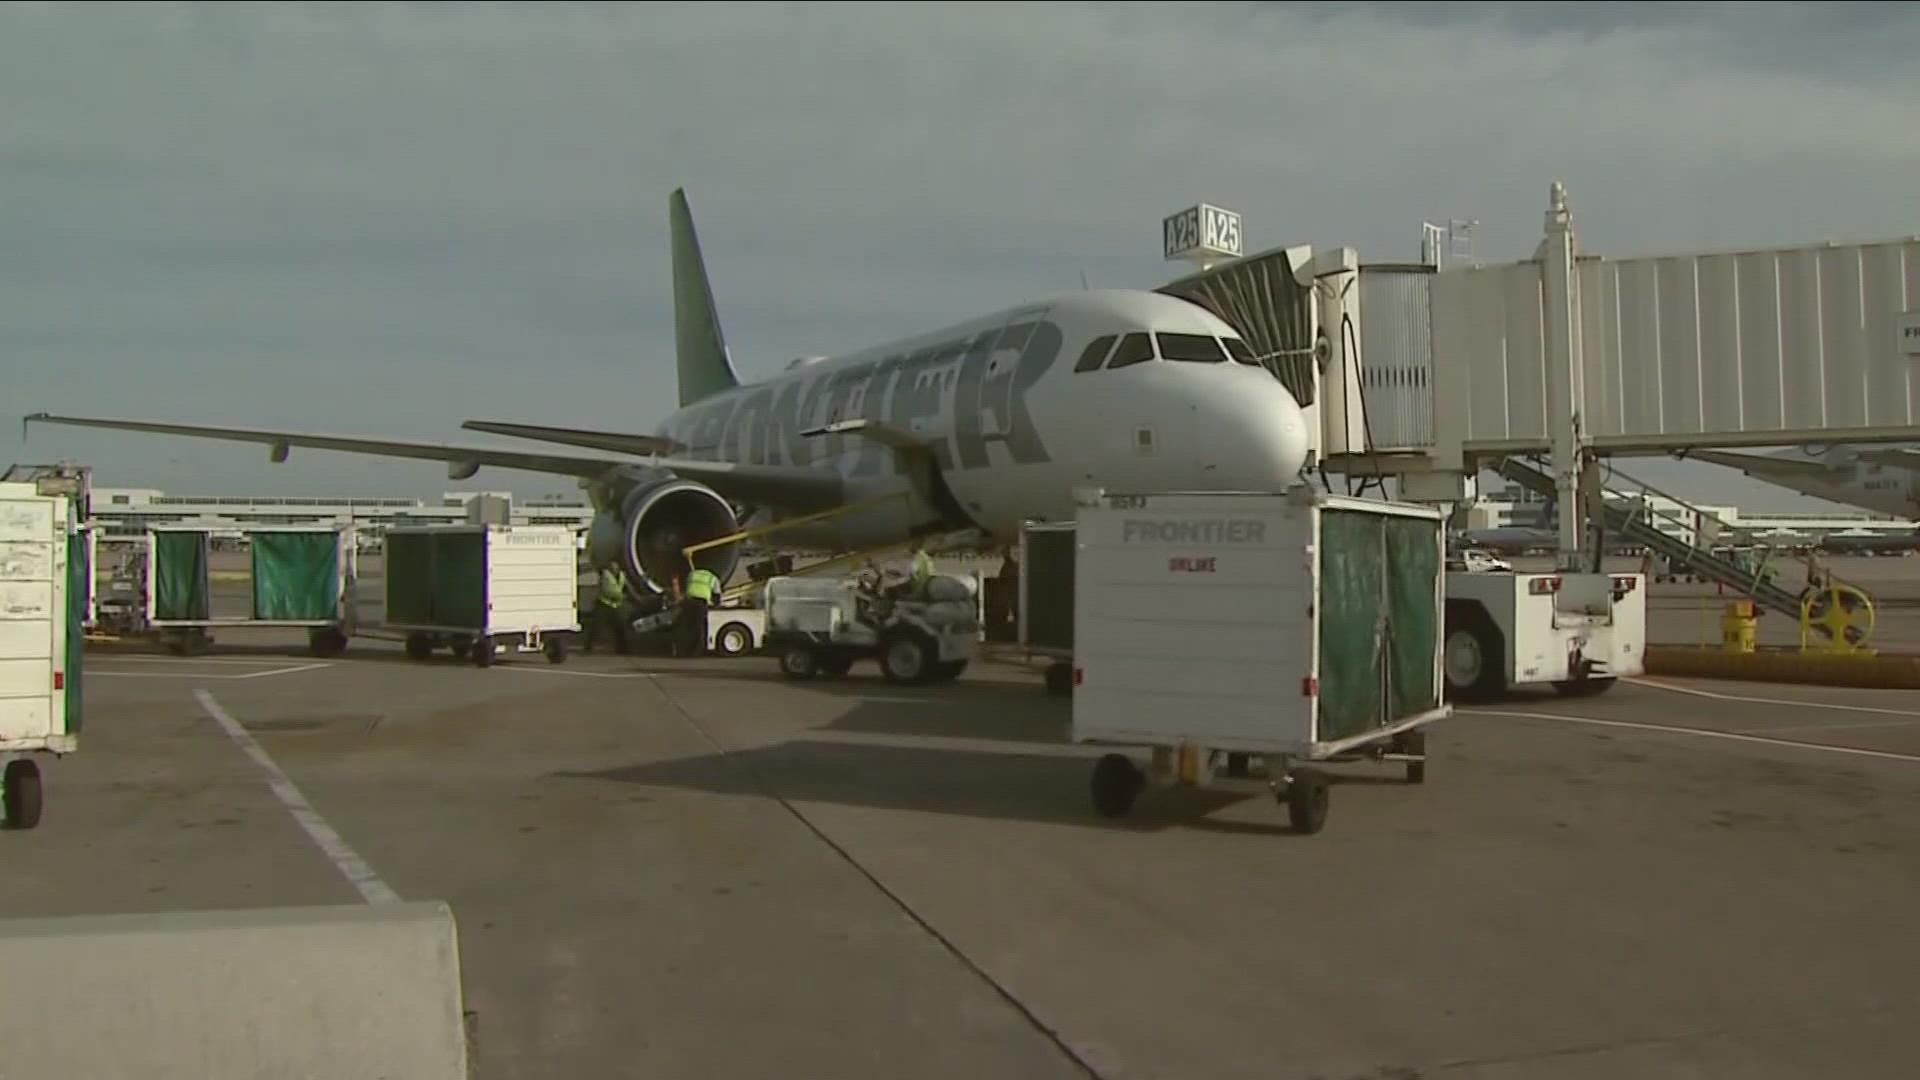 Frontier drops flights to Ft. Myers, Cancun